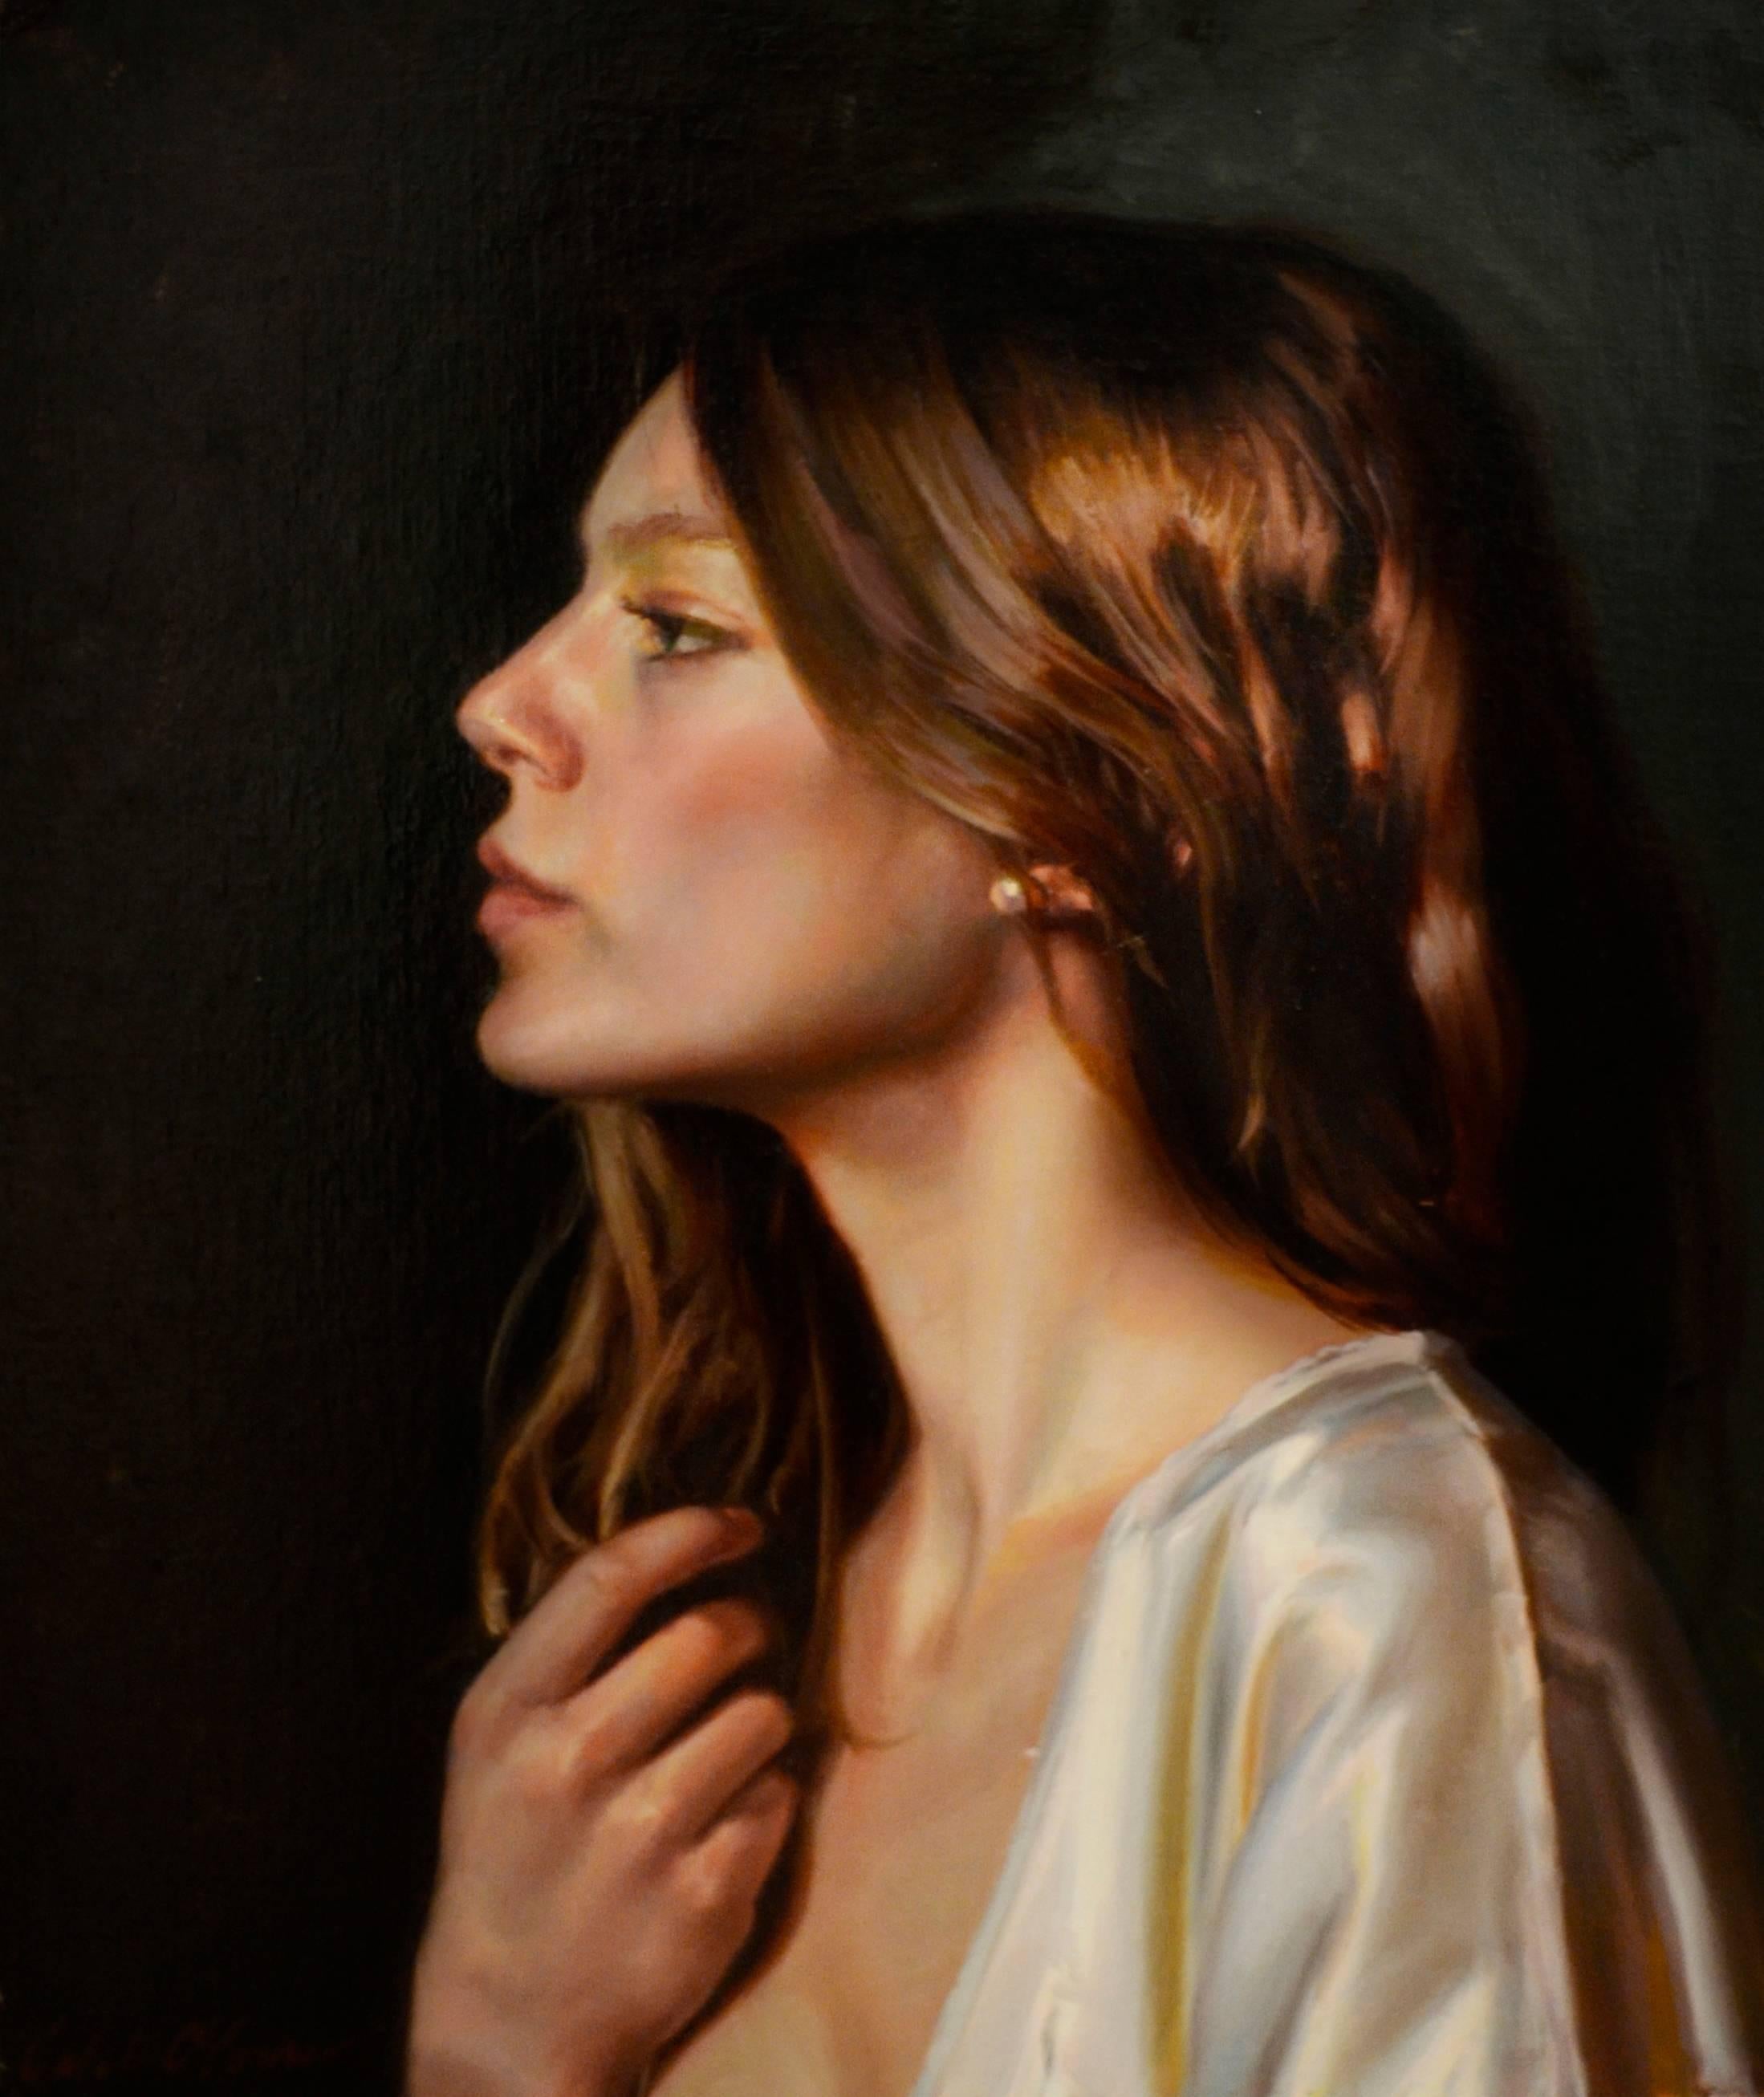 Untitled Portrait of a Female with Long Auburn Hair and a Silk Robe Oil on Panel